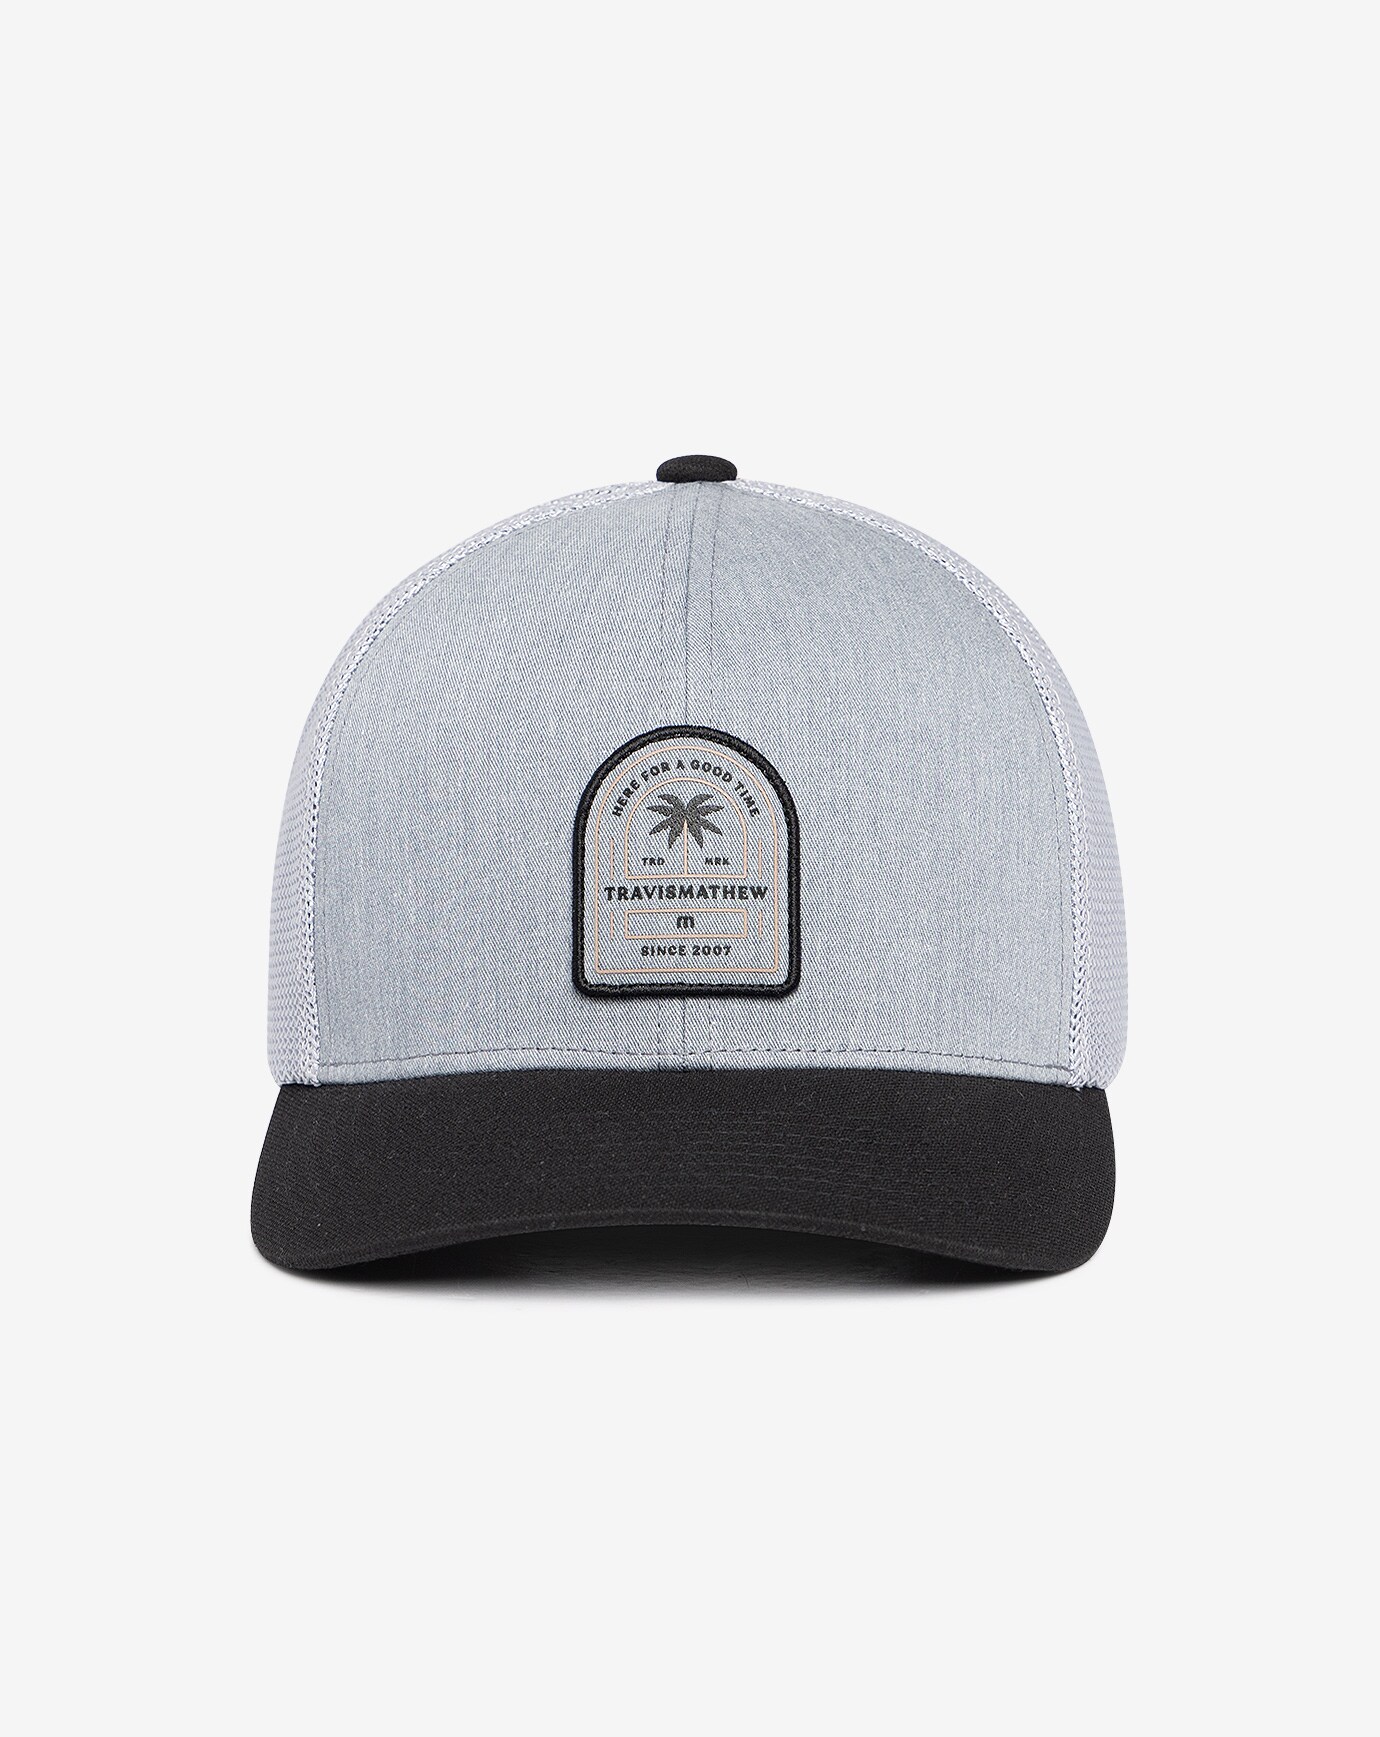 EXPENSE REPORT SNAPBACK HAT Image 1